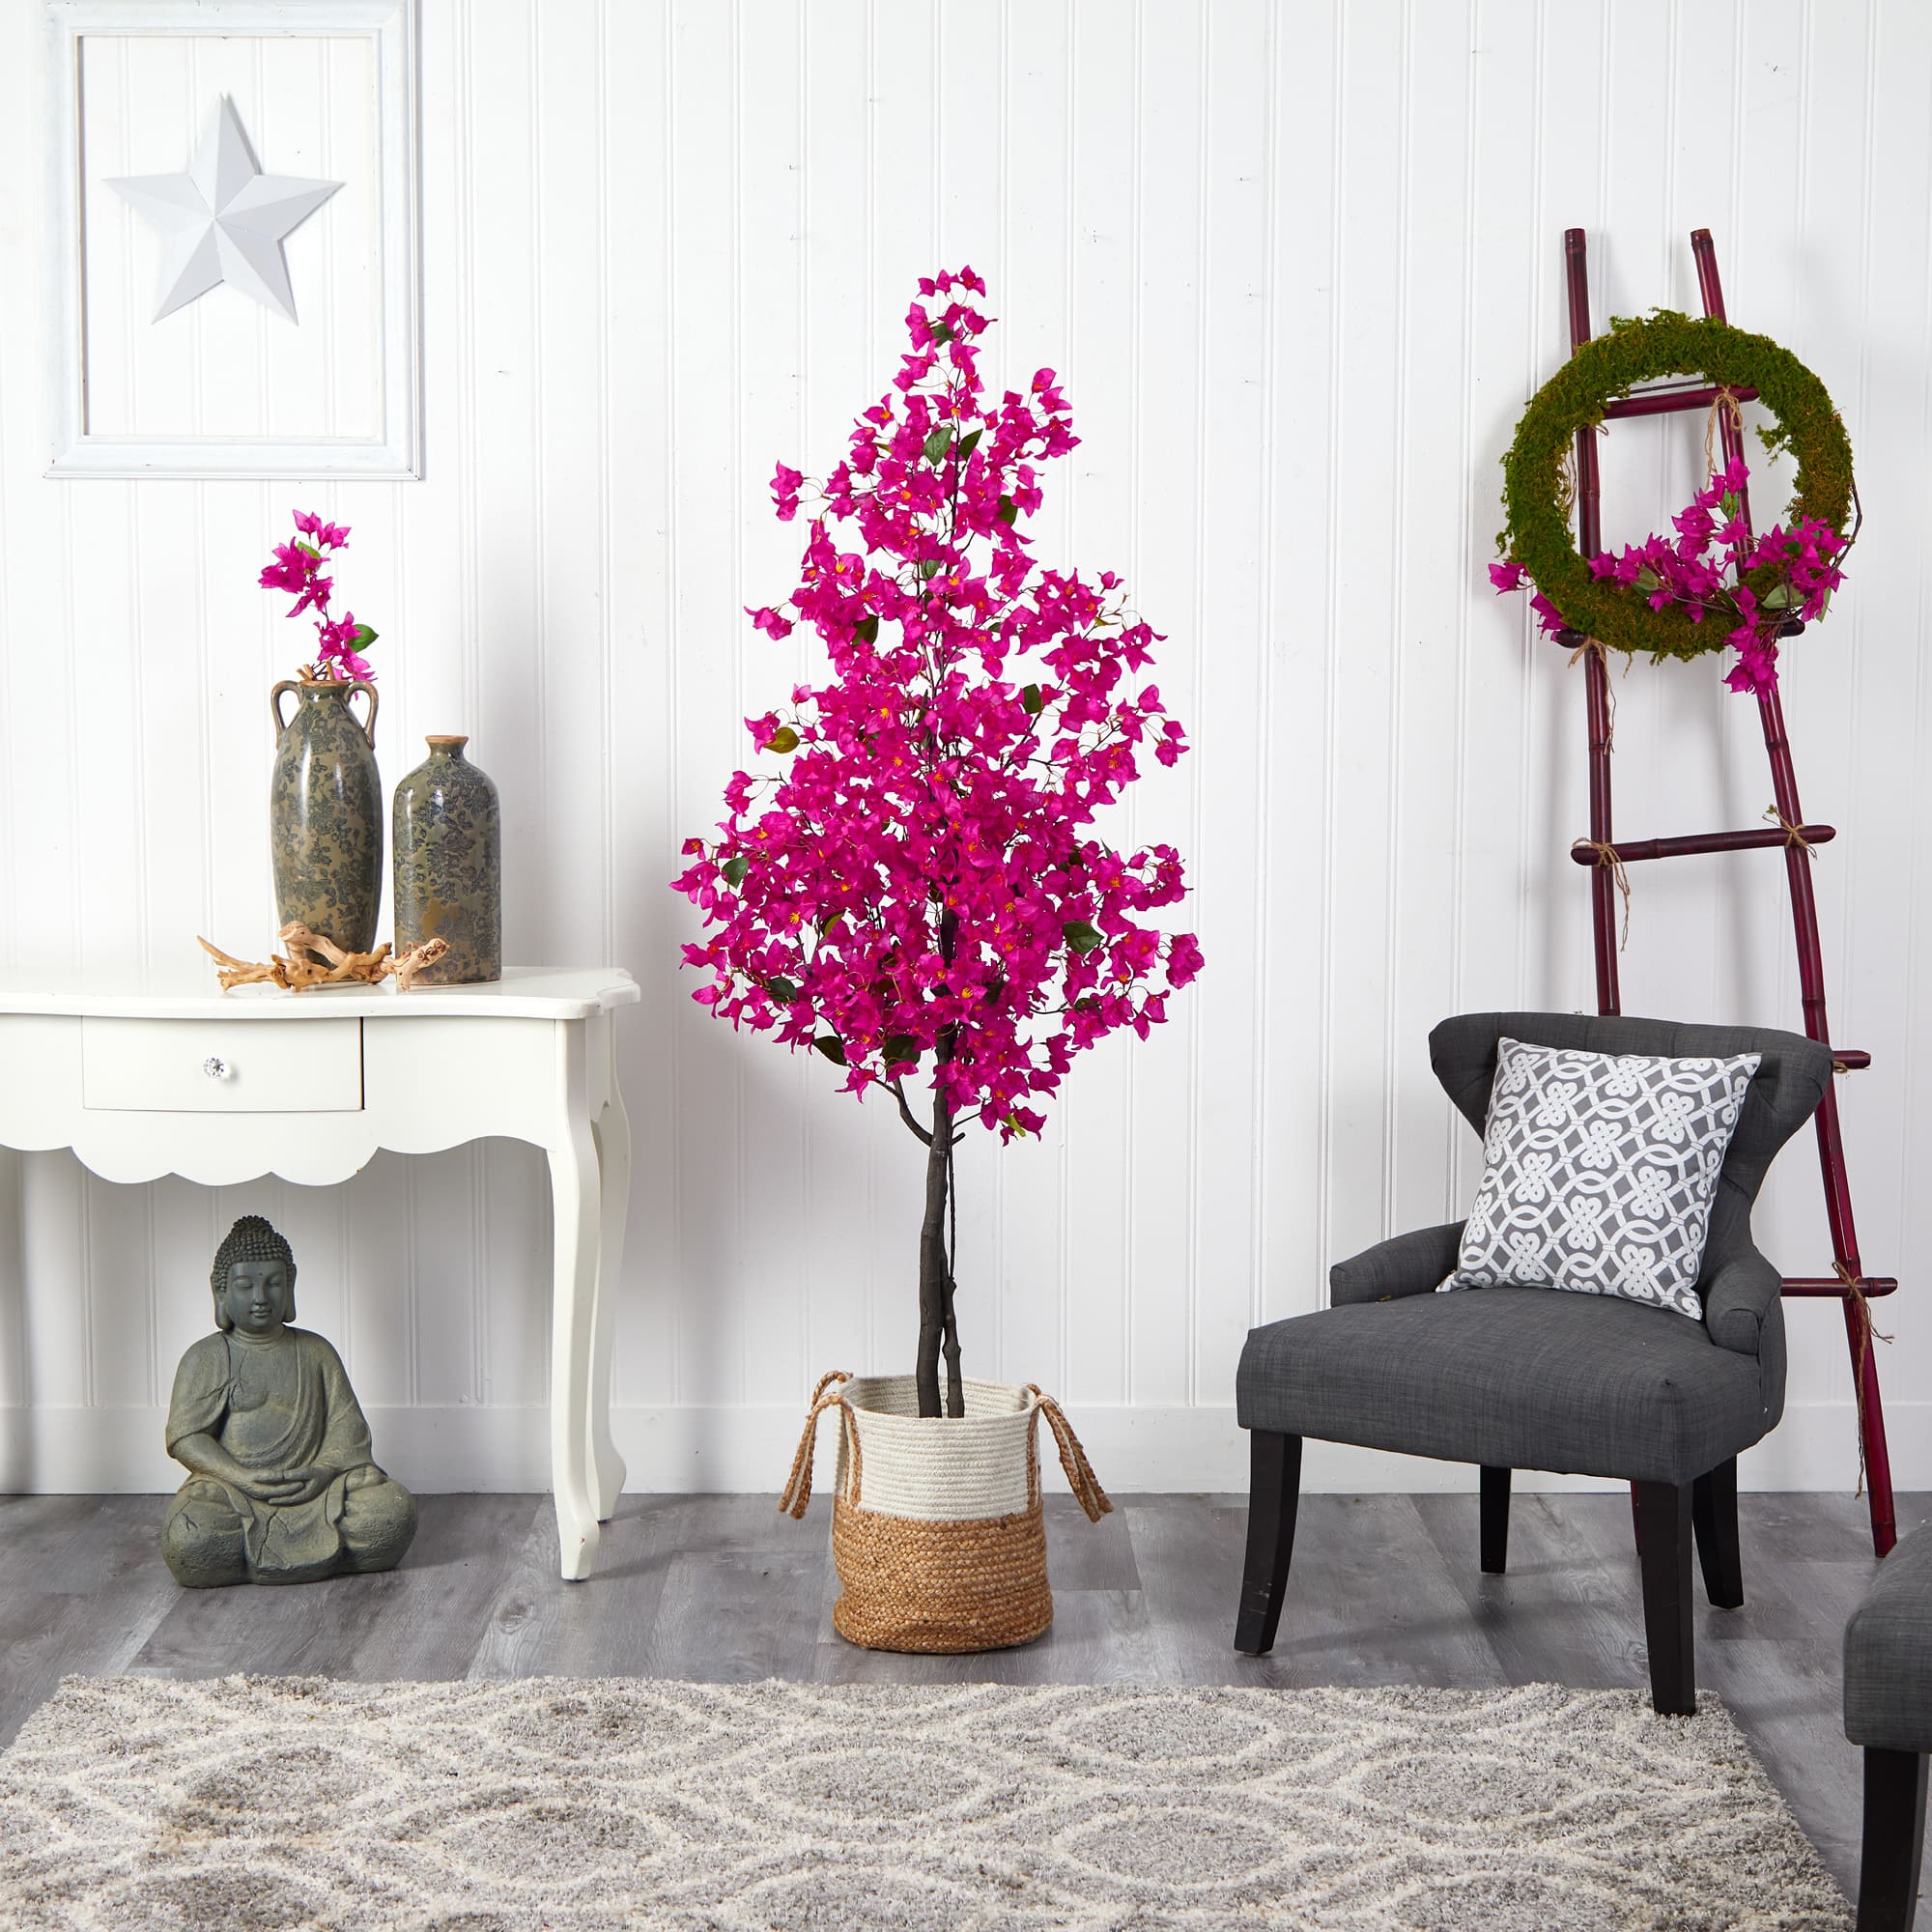 6ft. Artificial Bougainvillea Tree with Basket